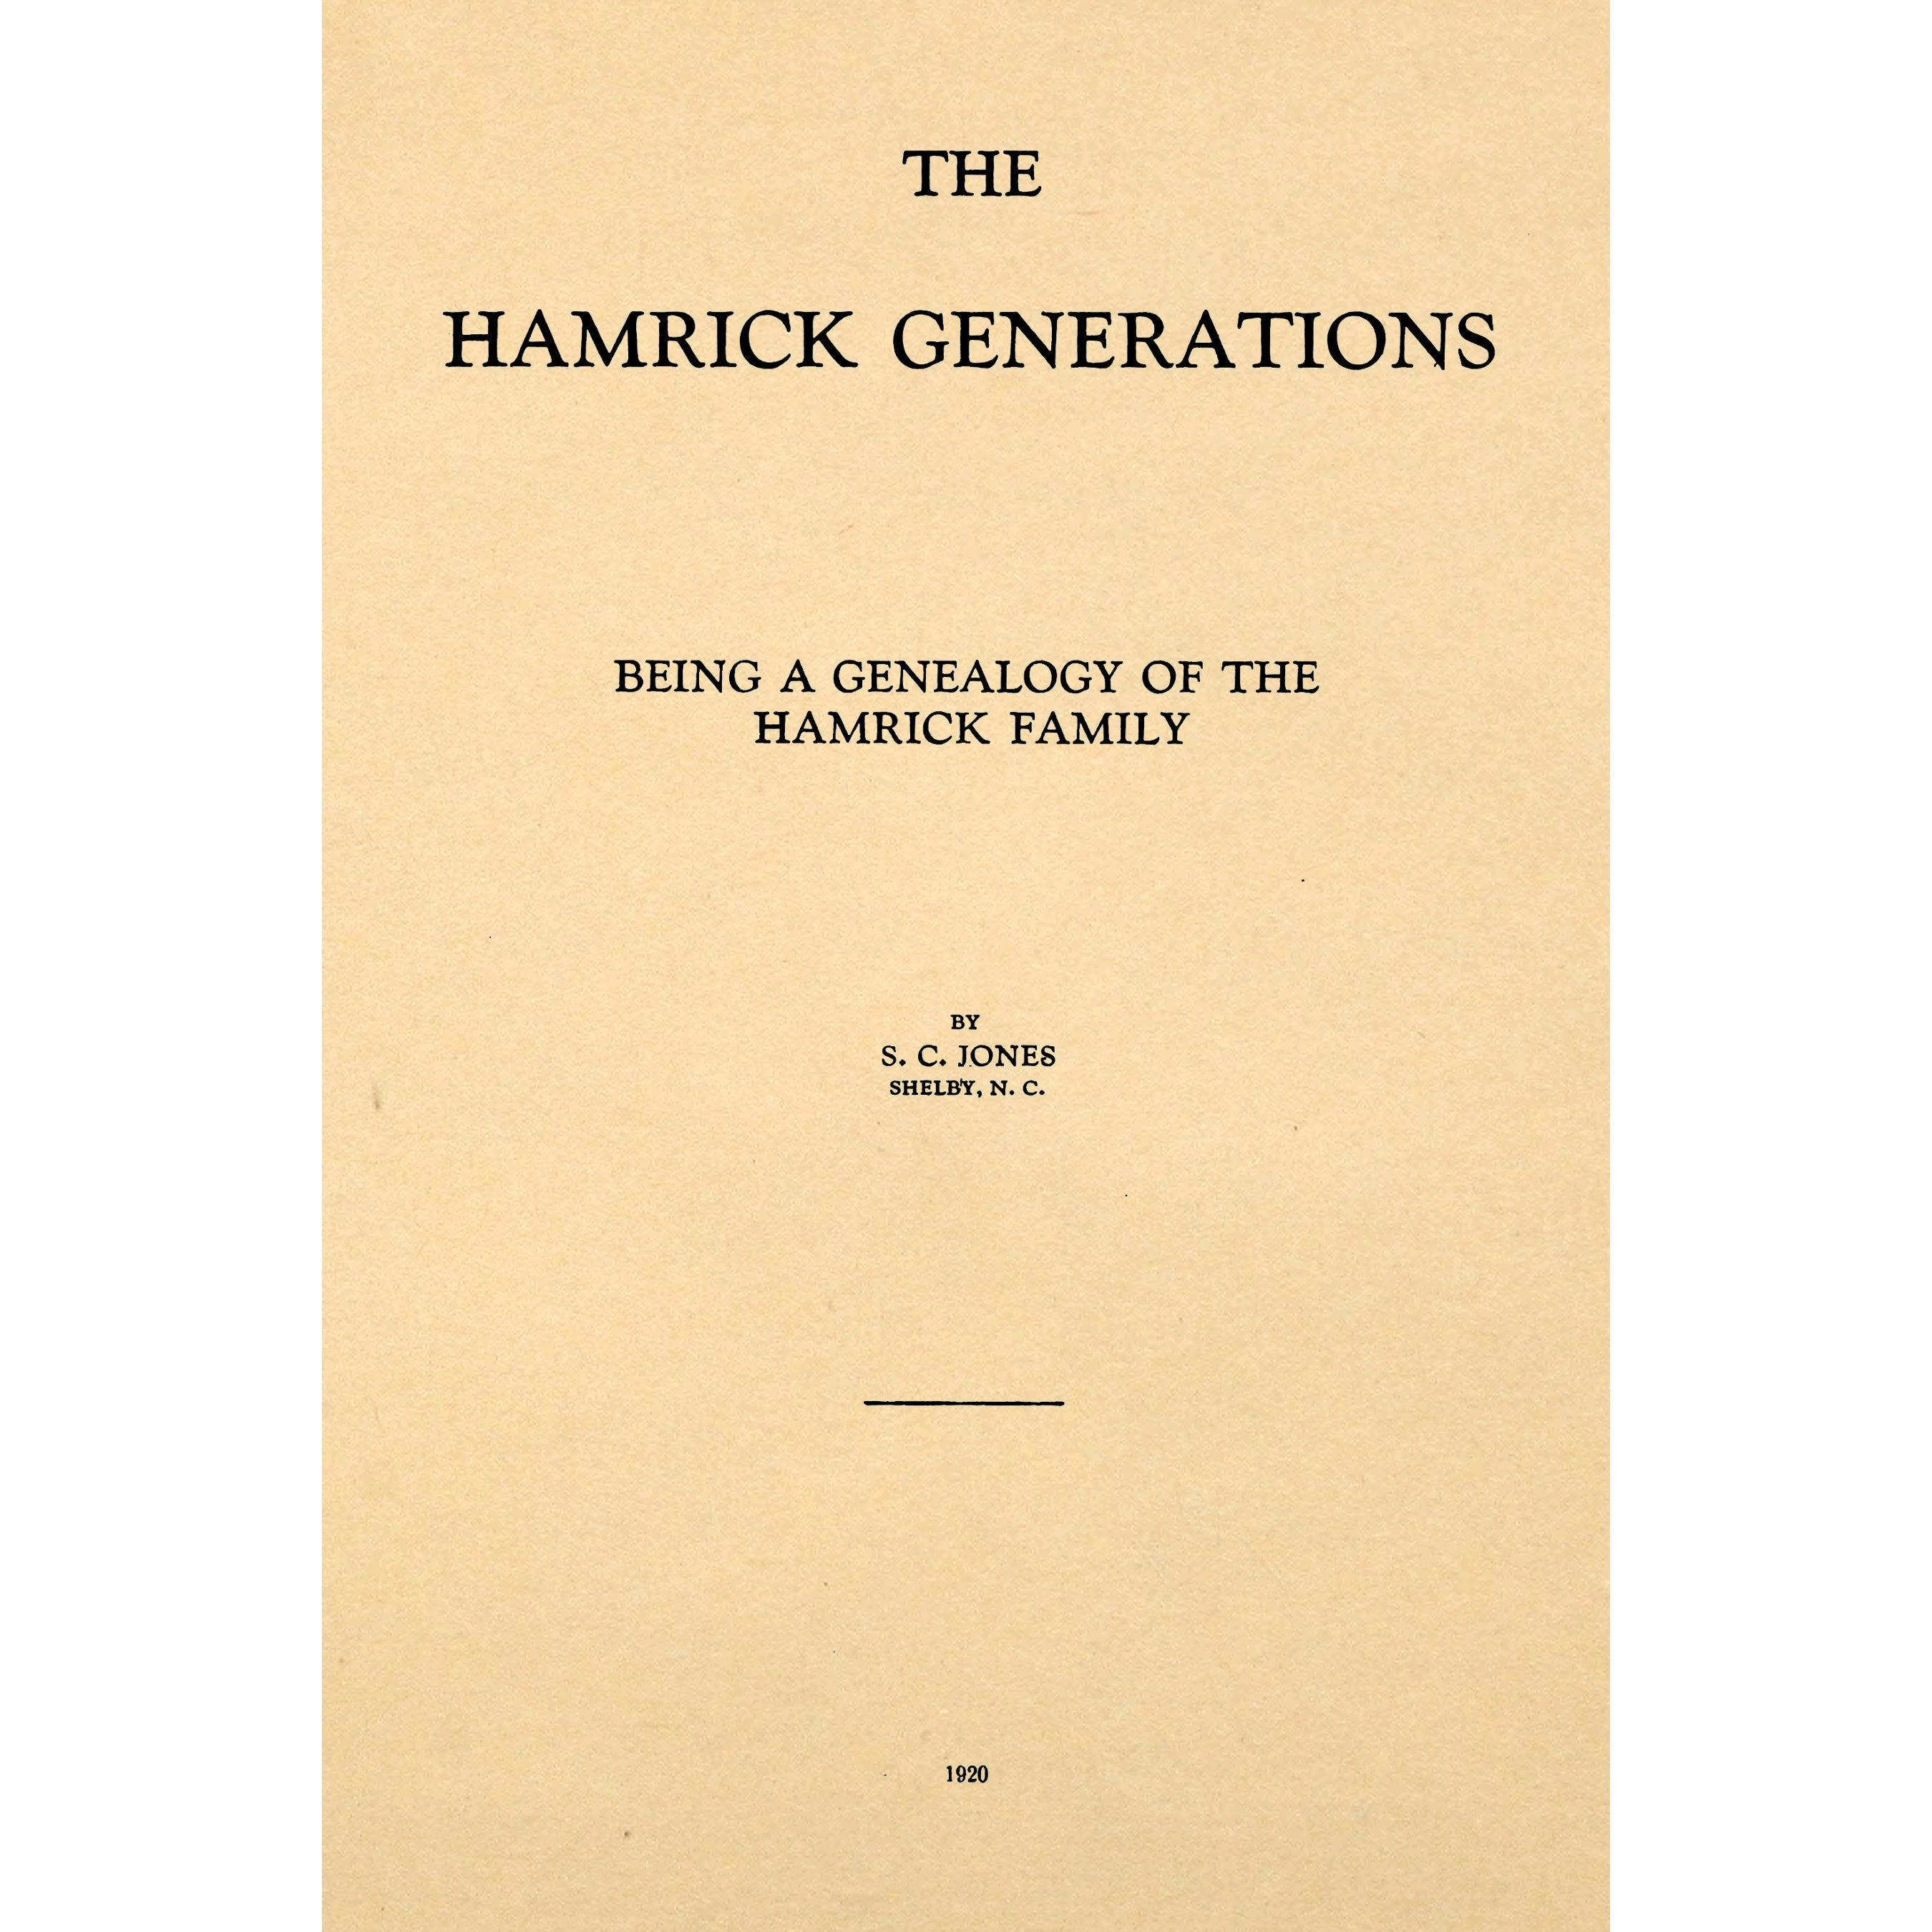 The Hamrick generations, being a genealogy of the Hamrick family